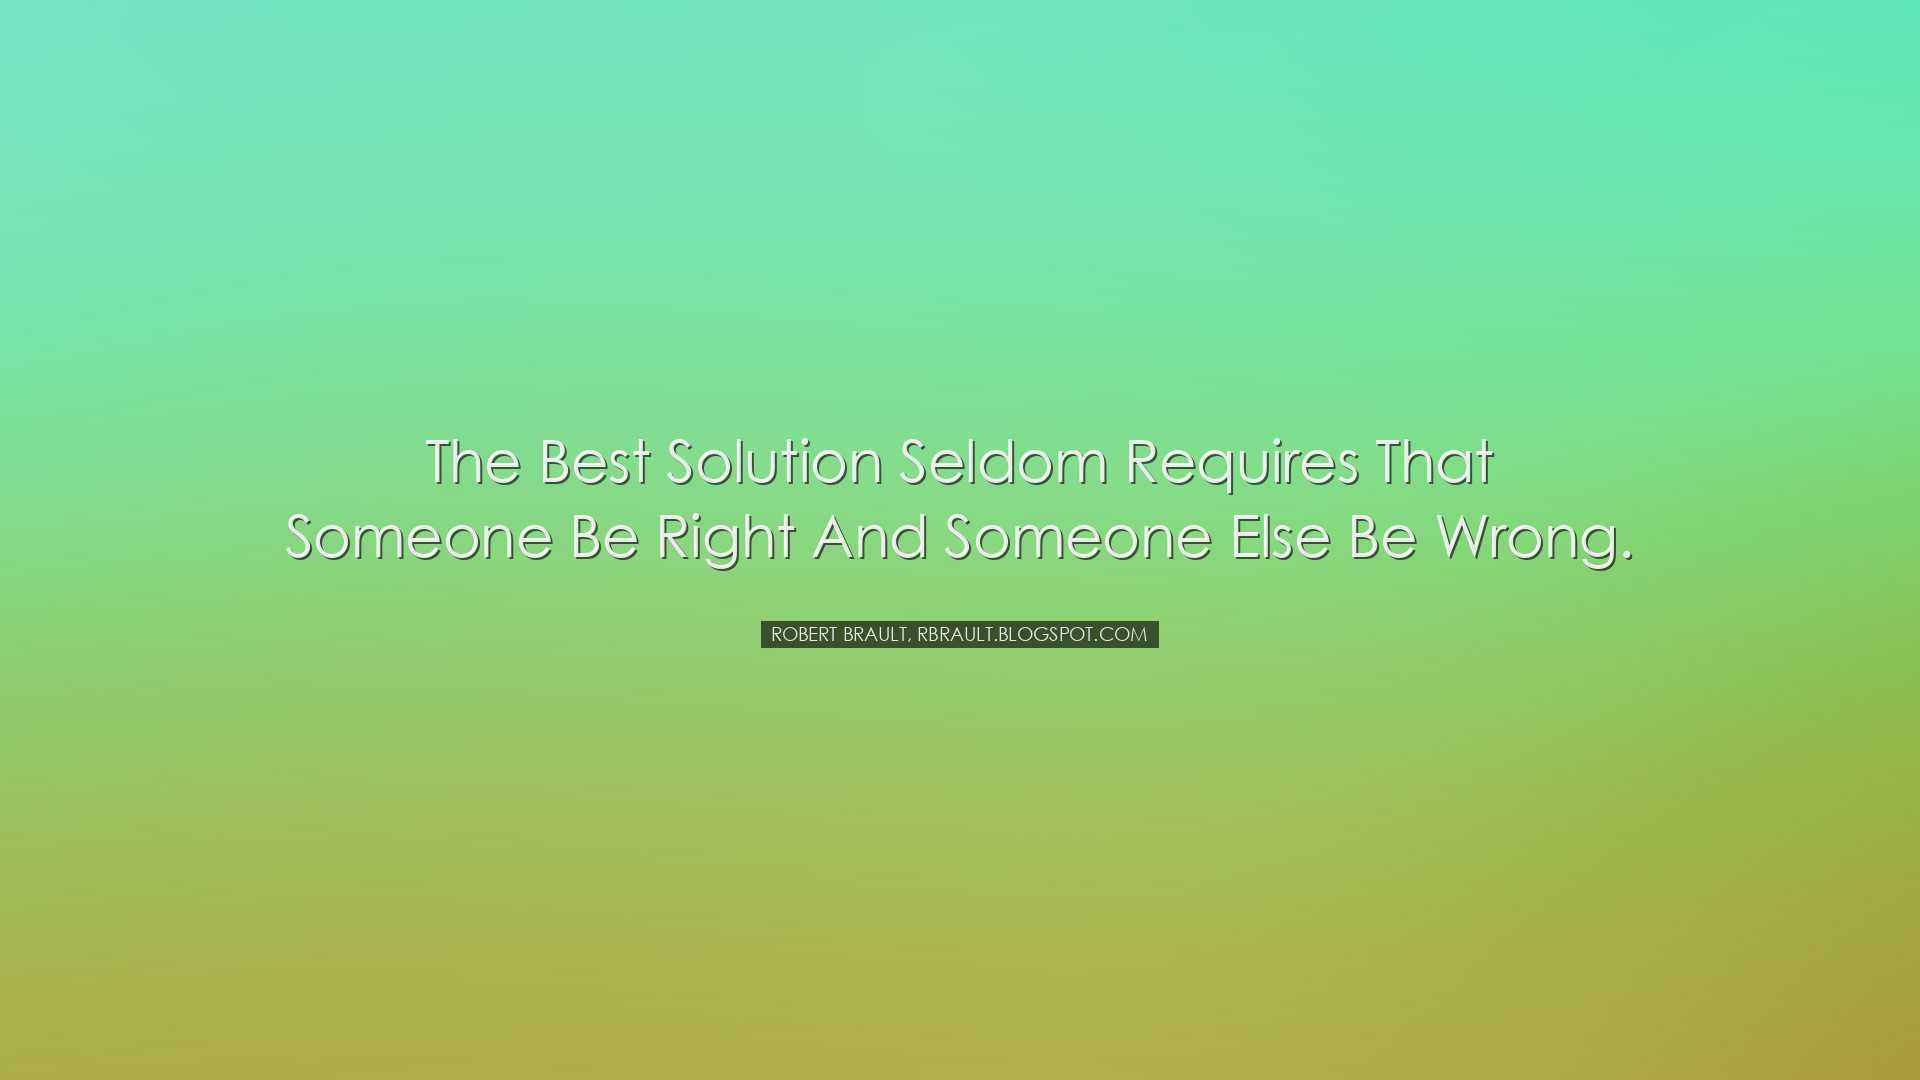 The best solution seldom requires that someone be right and someon